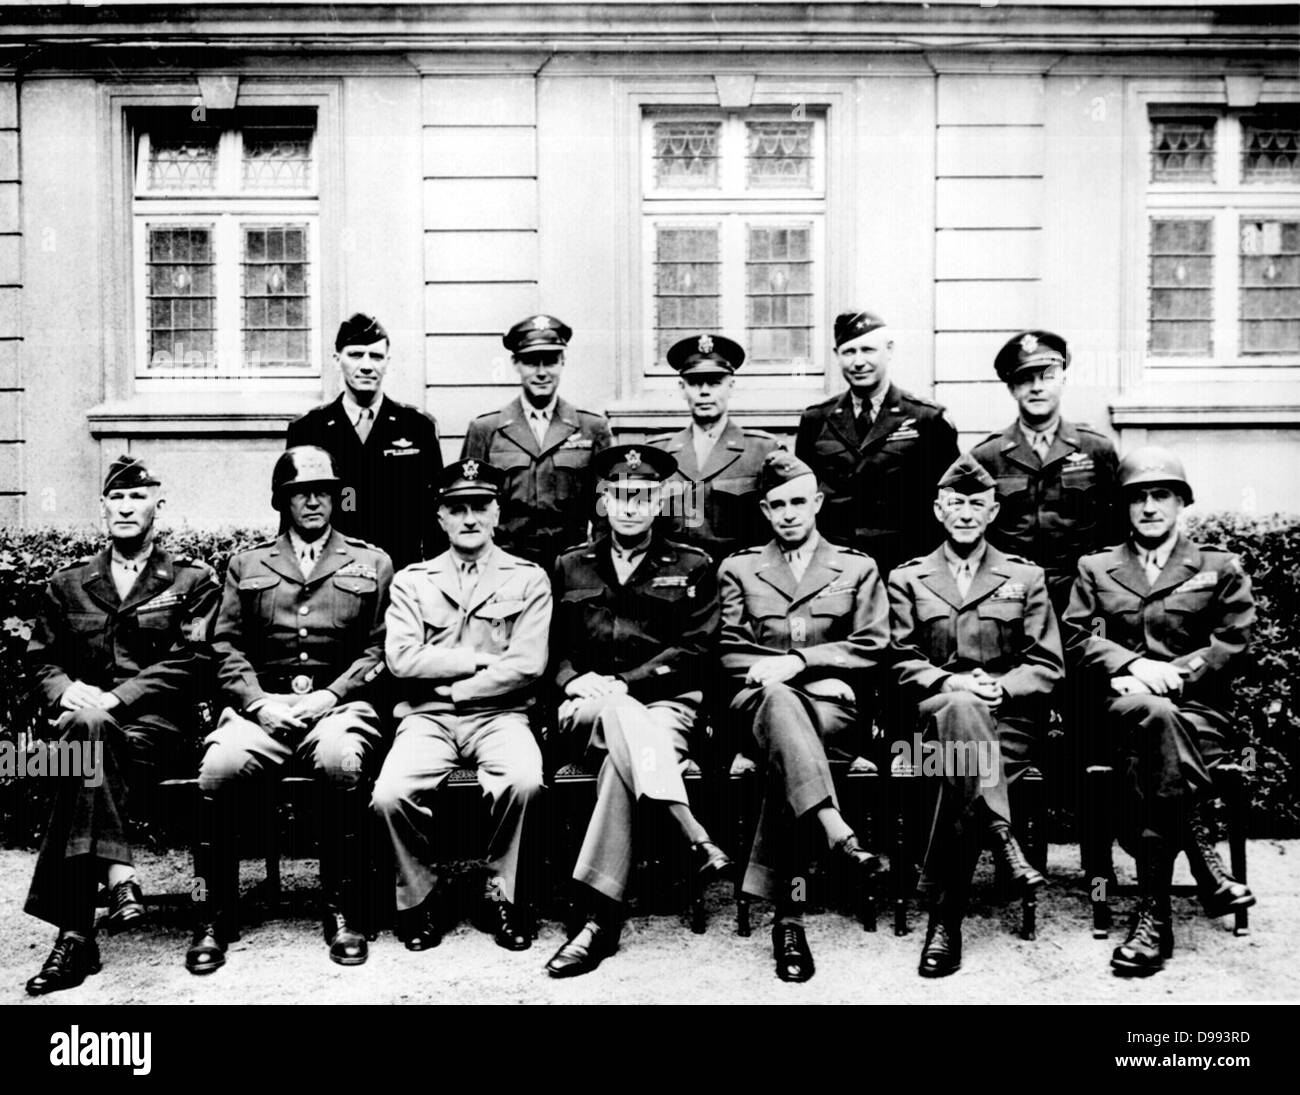 Senior American military officers during World War II. Seated (left to right) Generals William H. Simpson, George S. Patton, Carl A. Spaatz, Dwight D. Eisenhower, Omar Bradley, Courtney H. Hodges, and Leonard T. Gerow; standing (from left to right) Ralph Stock Photo